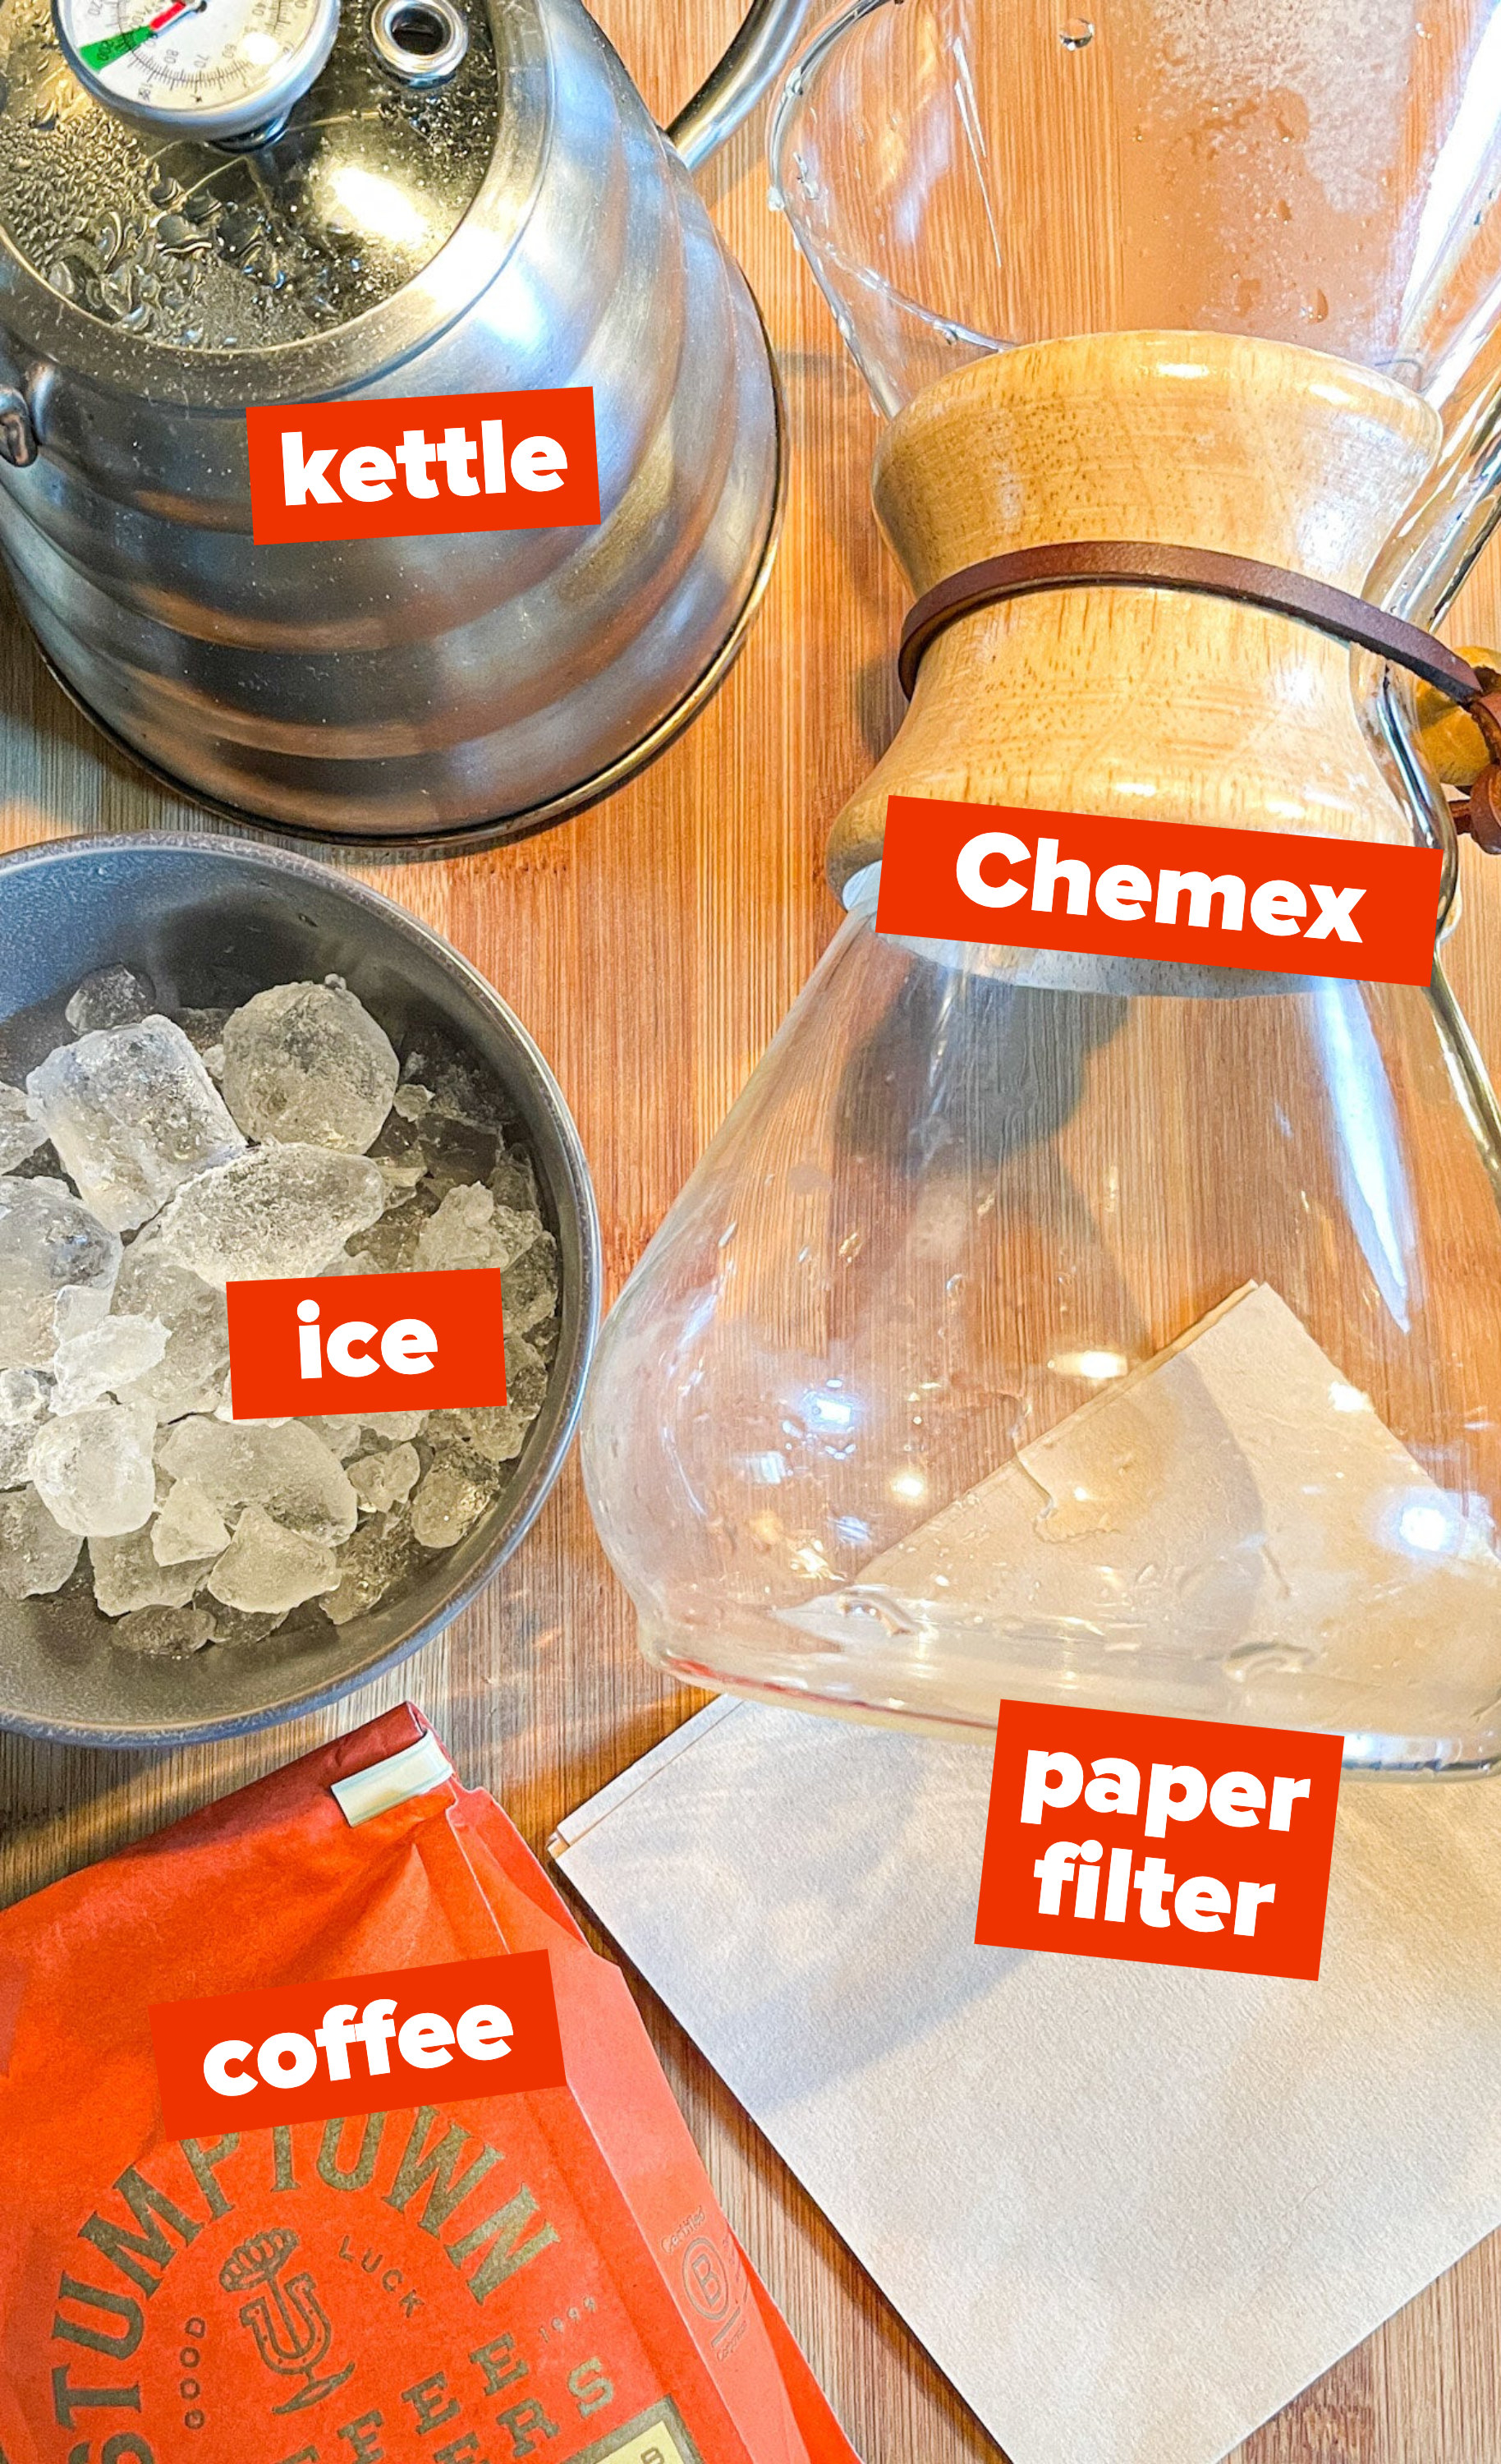 ingredients for Japanese iced coffee laid on a cutting board: kettle, Chemex, ice, paper filter, coffee